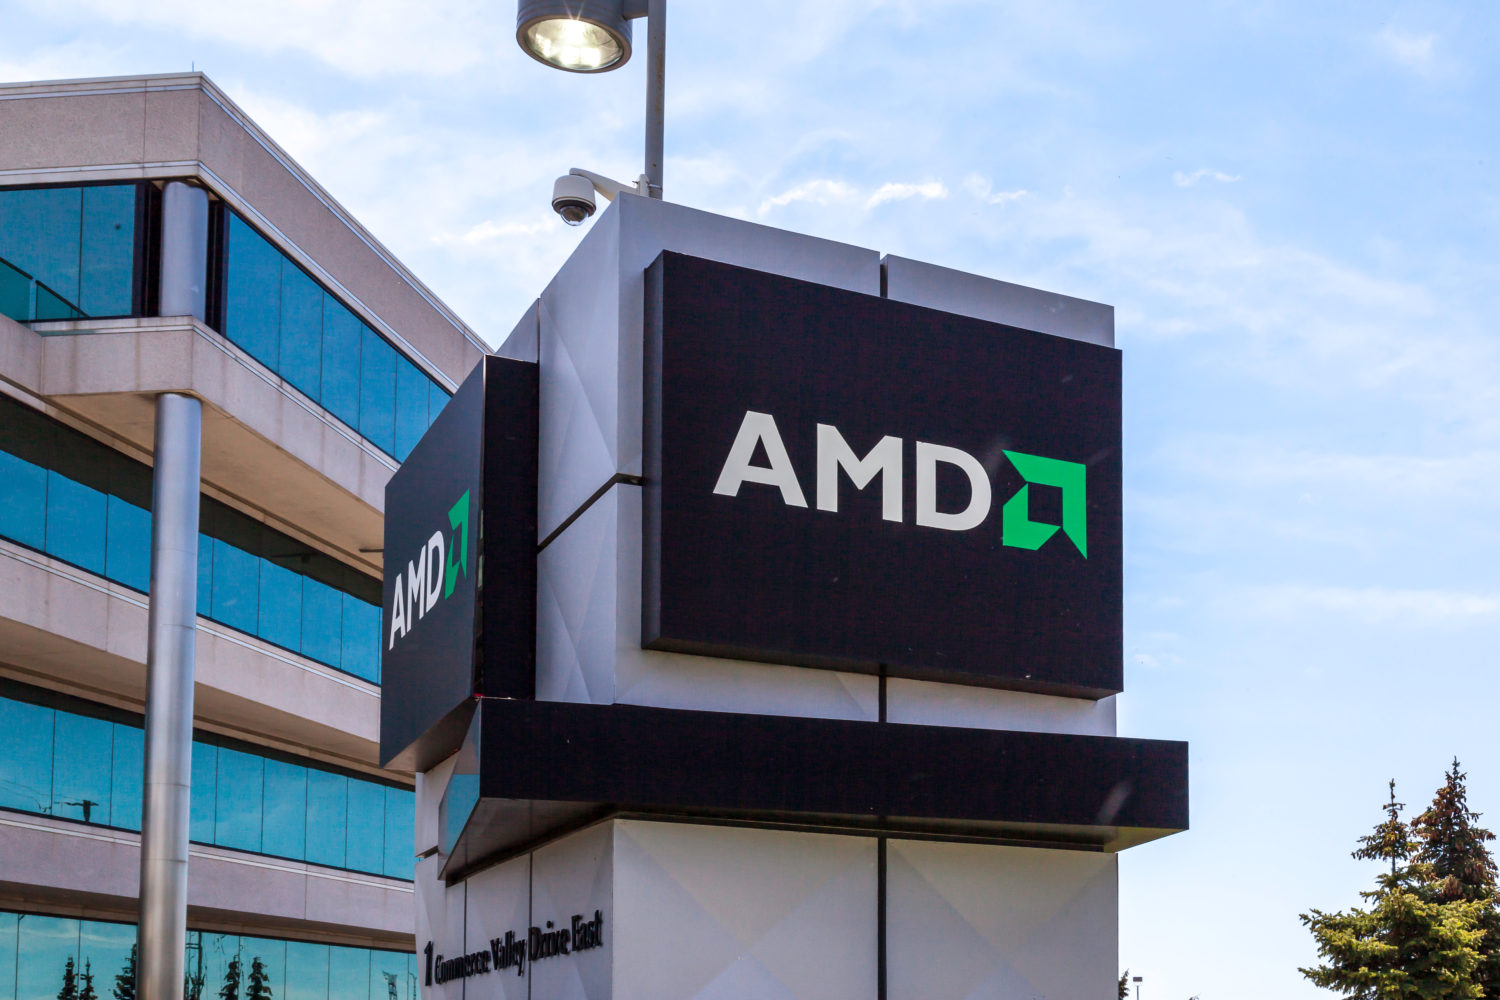 AMD will not restrict the use of video cards for mining